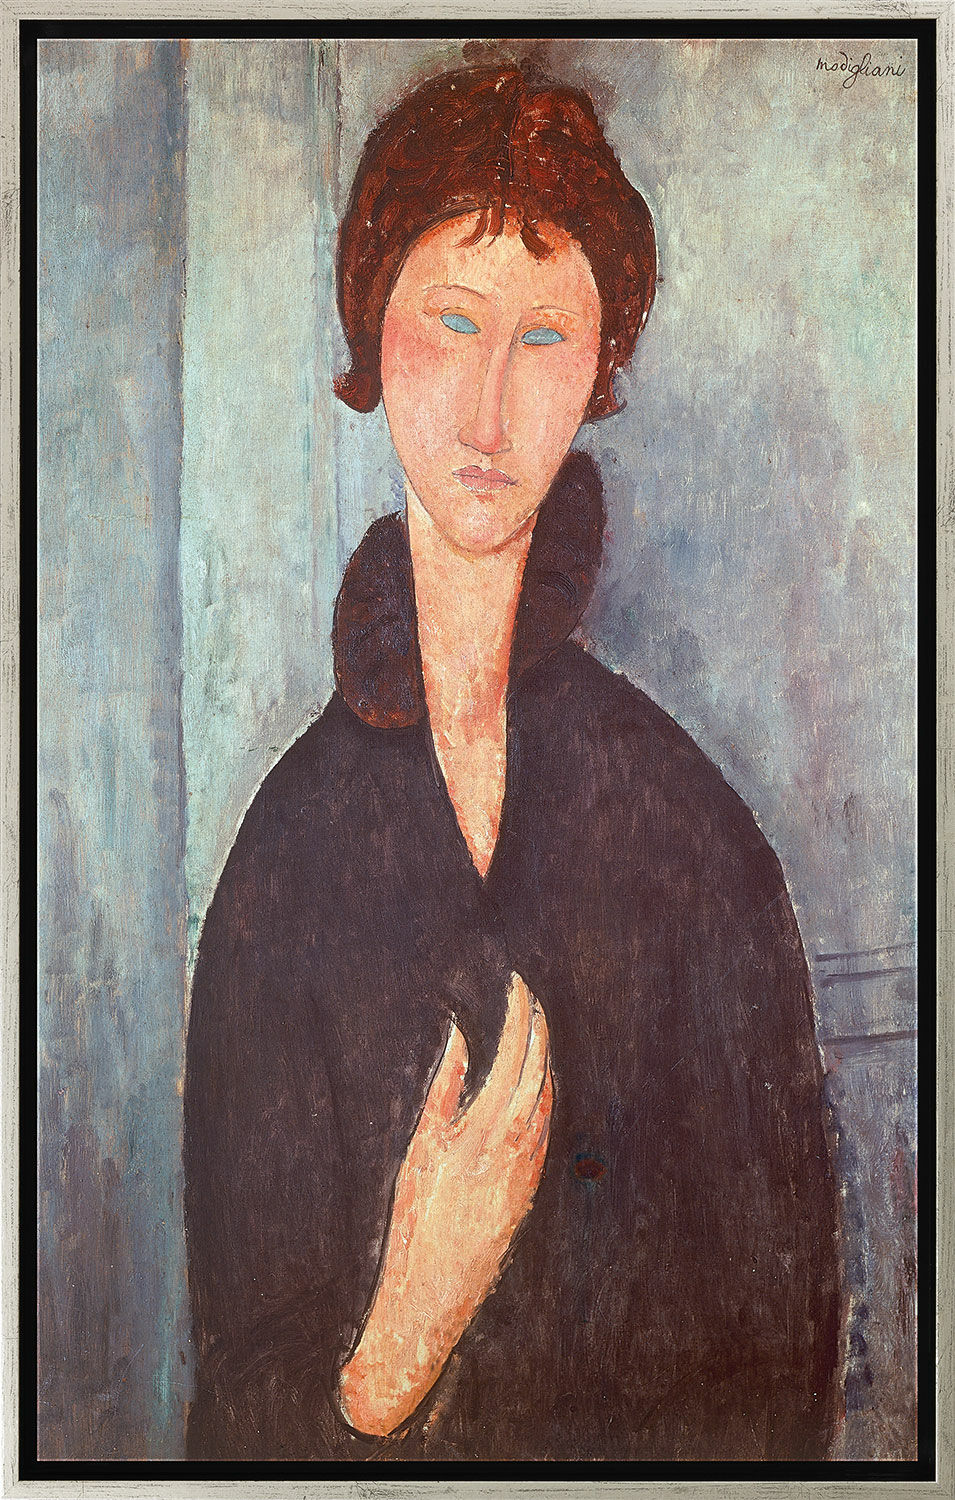 Picture "Woman with Blue Eyes" (1918), silver-coloured framed version by Amedeo Modigliani